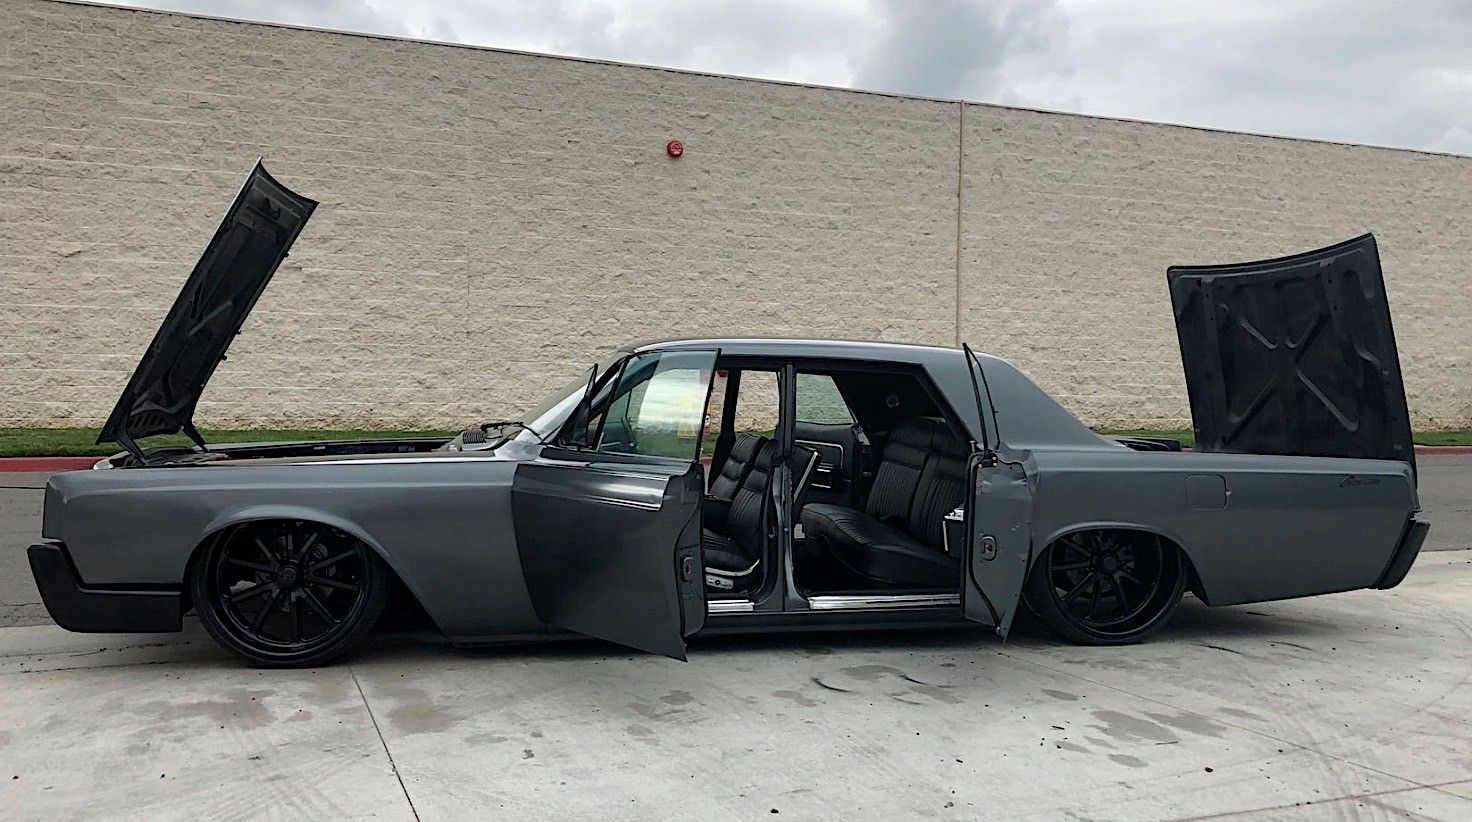 Bagged 1966 Lincoln Continental with all the doors open